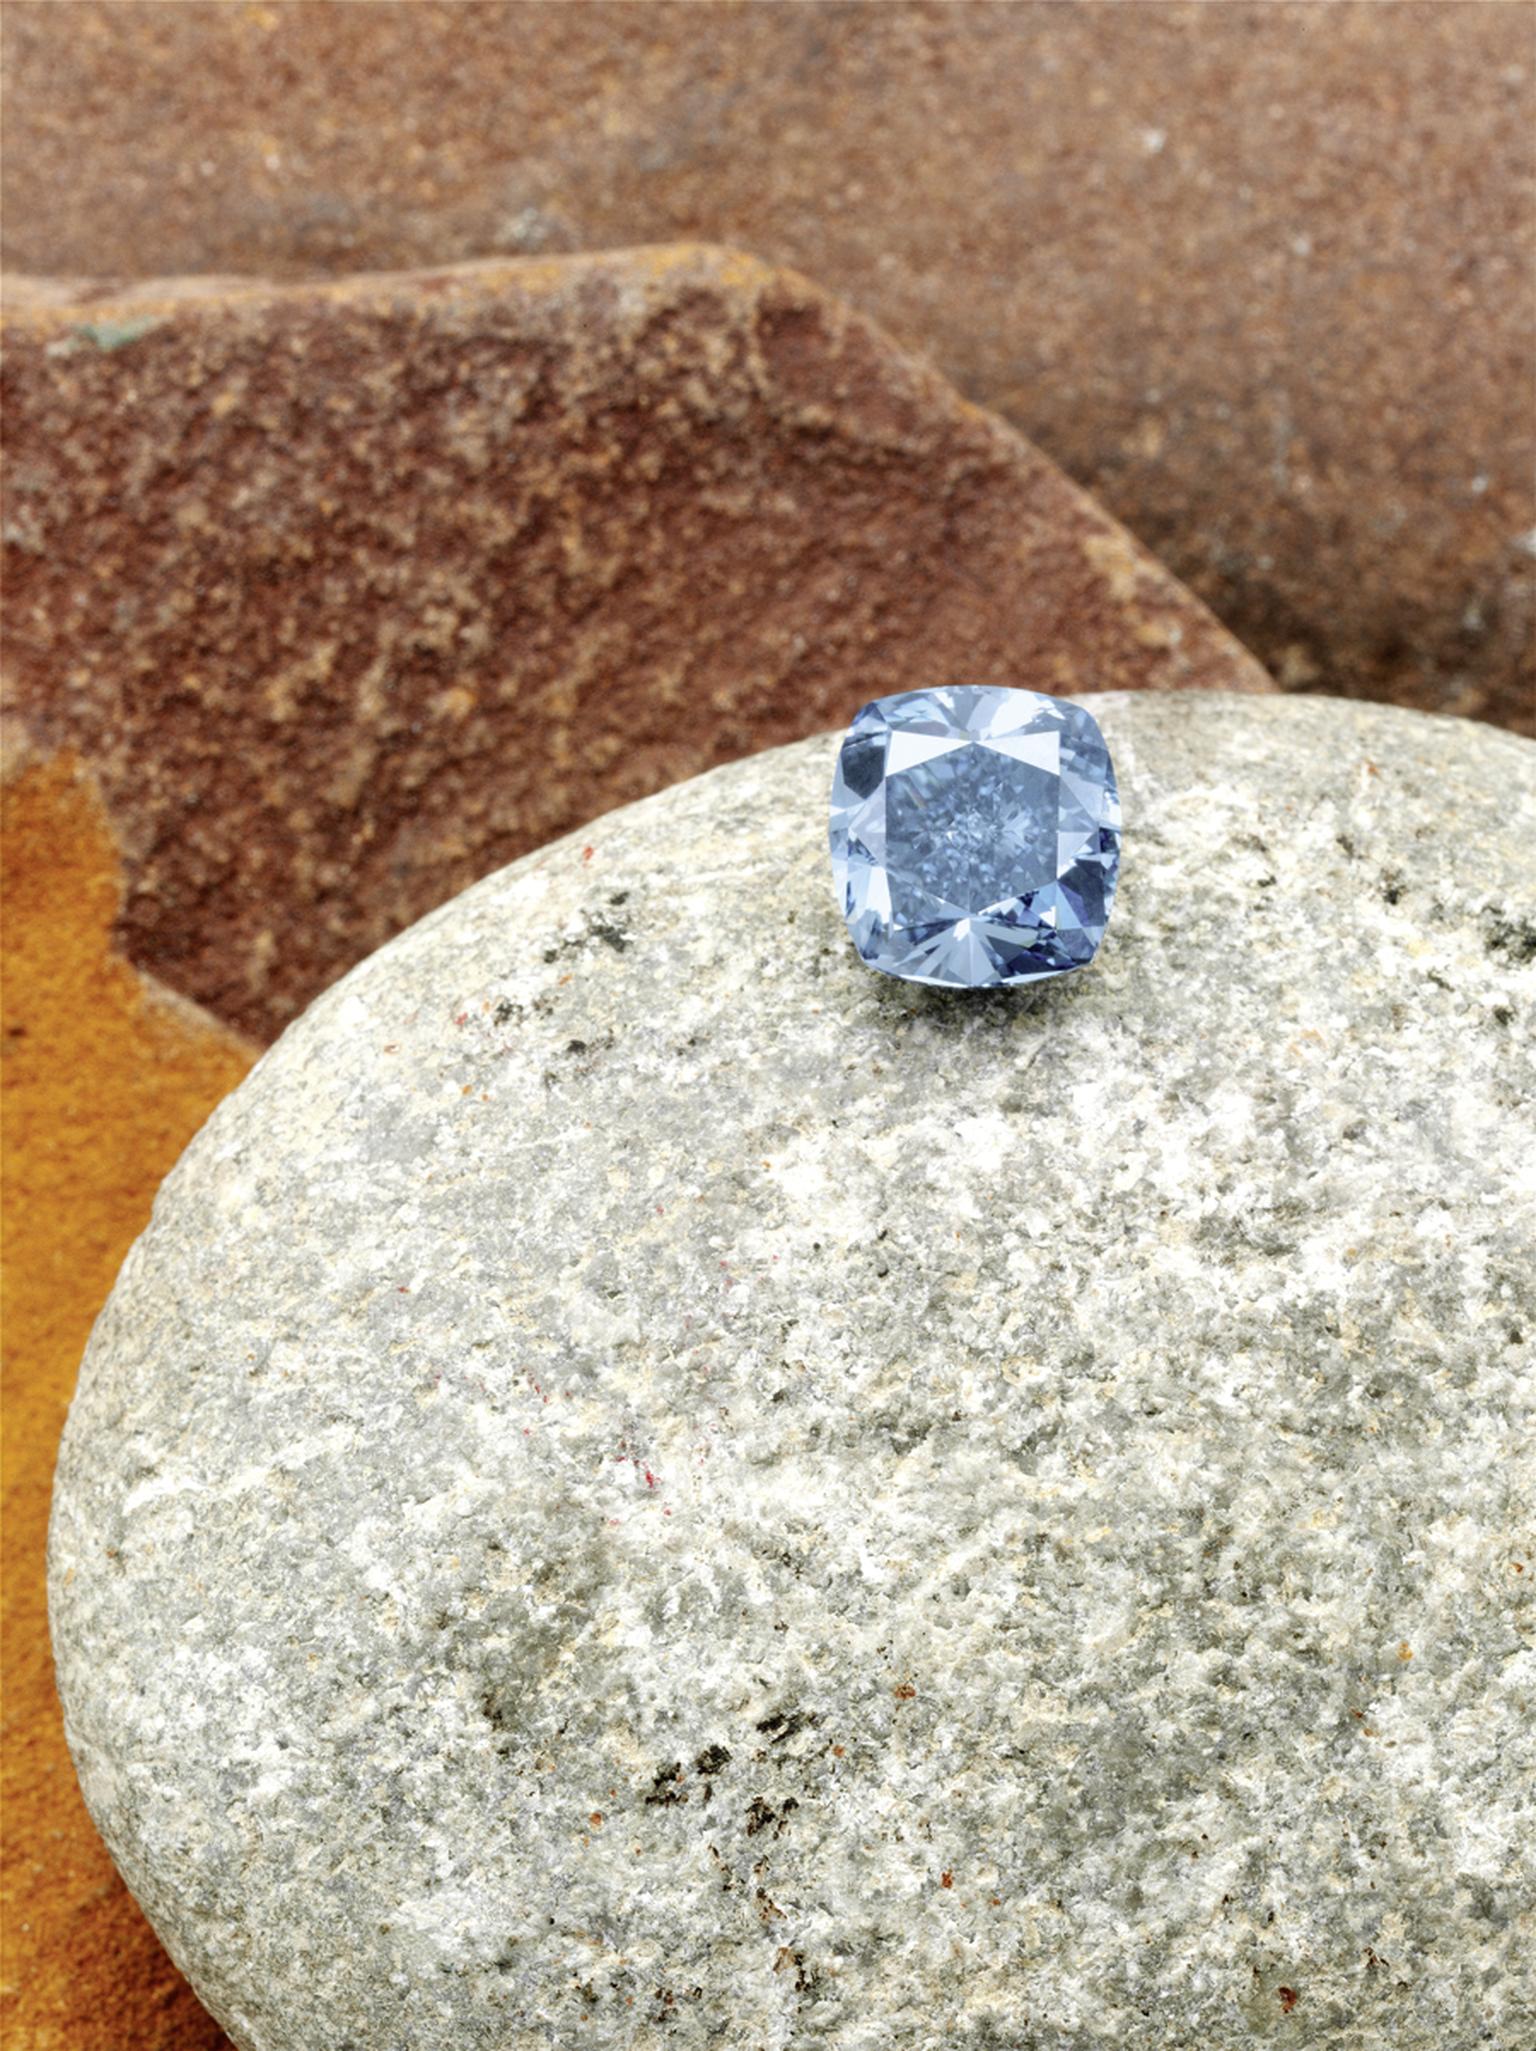 The Star of Josephine, a 7 carat, internally flawless, fancy vivid blue diamond recovered from Cullinan by Petra Diamonds - a leading independent diamond mining group and supplier of rough diamonds.